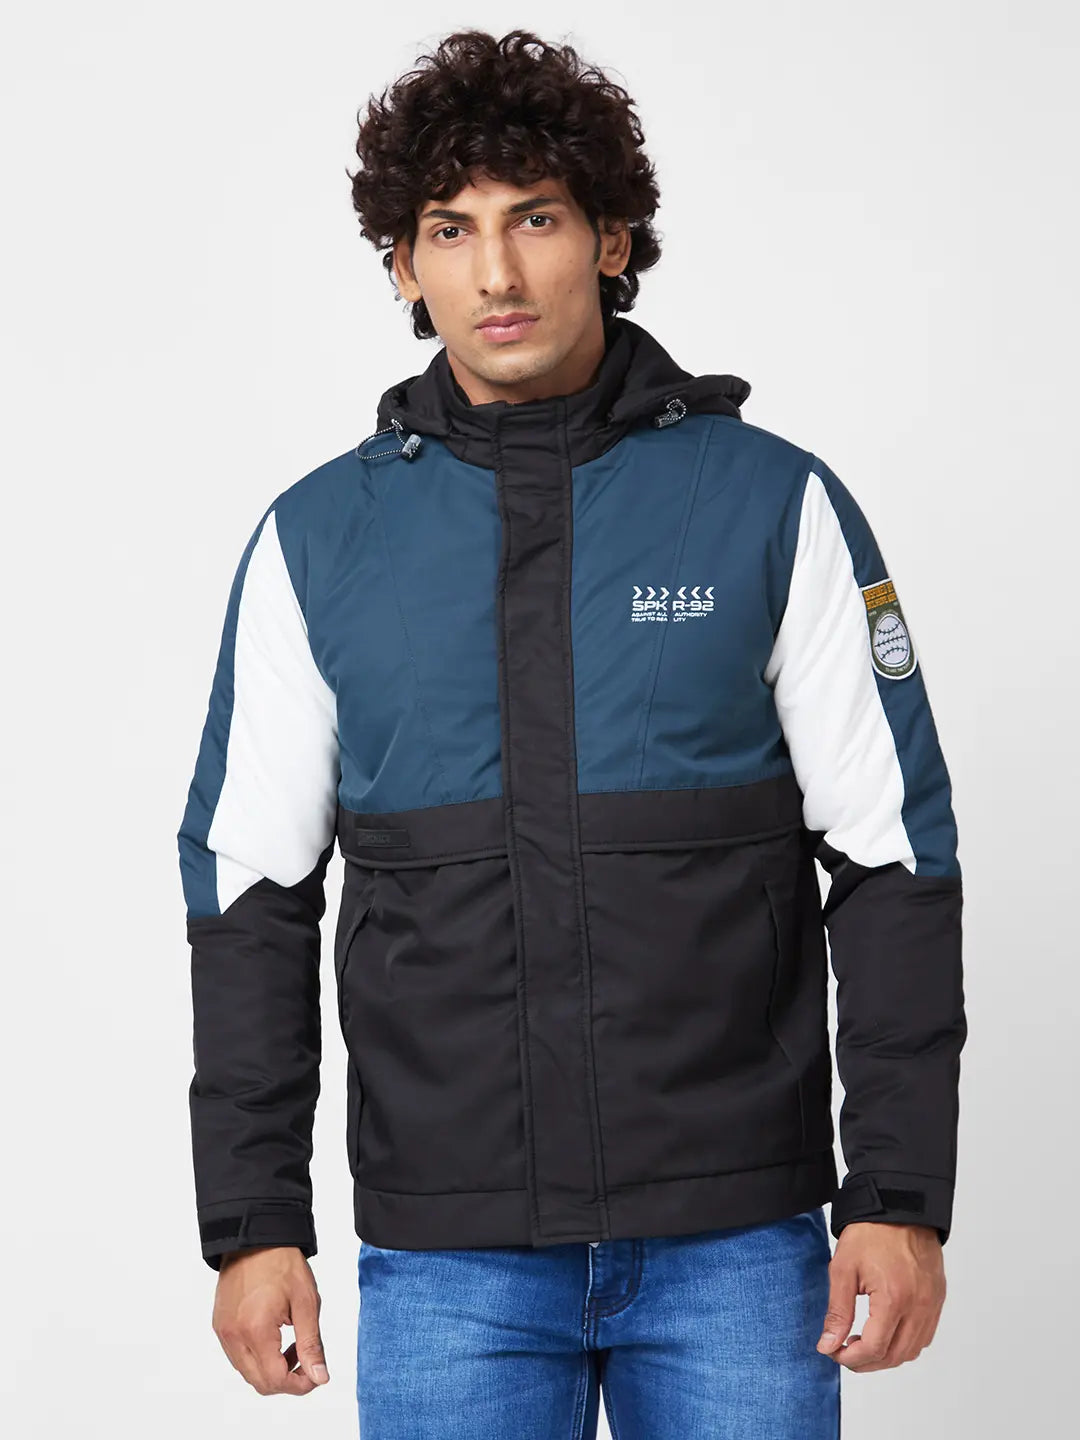 MEN'S SHELL COLOR BLOCKED JACKET WITH SLEEVE BADGE DETAIL.